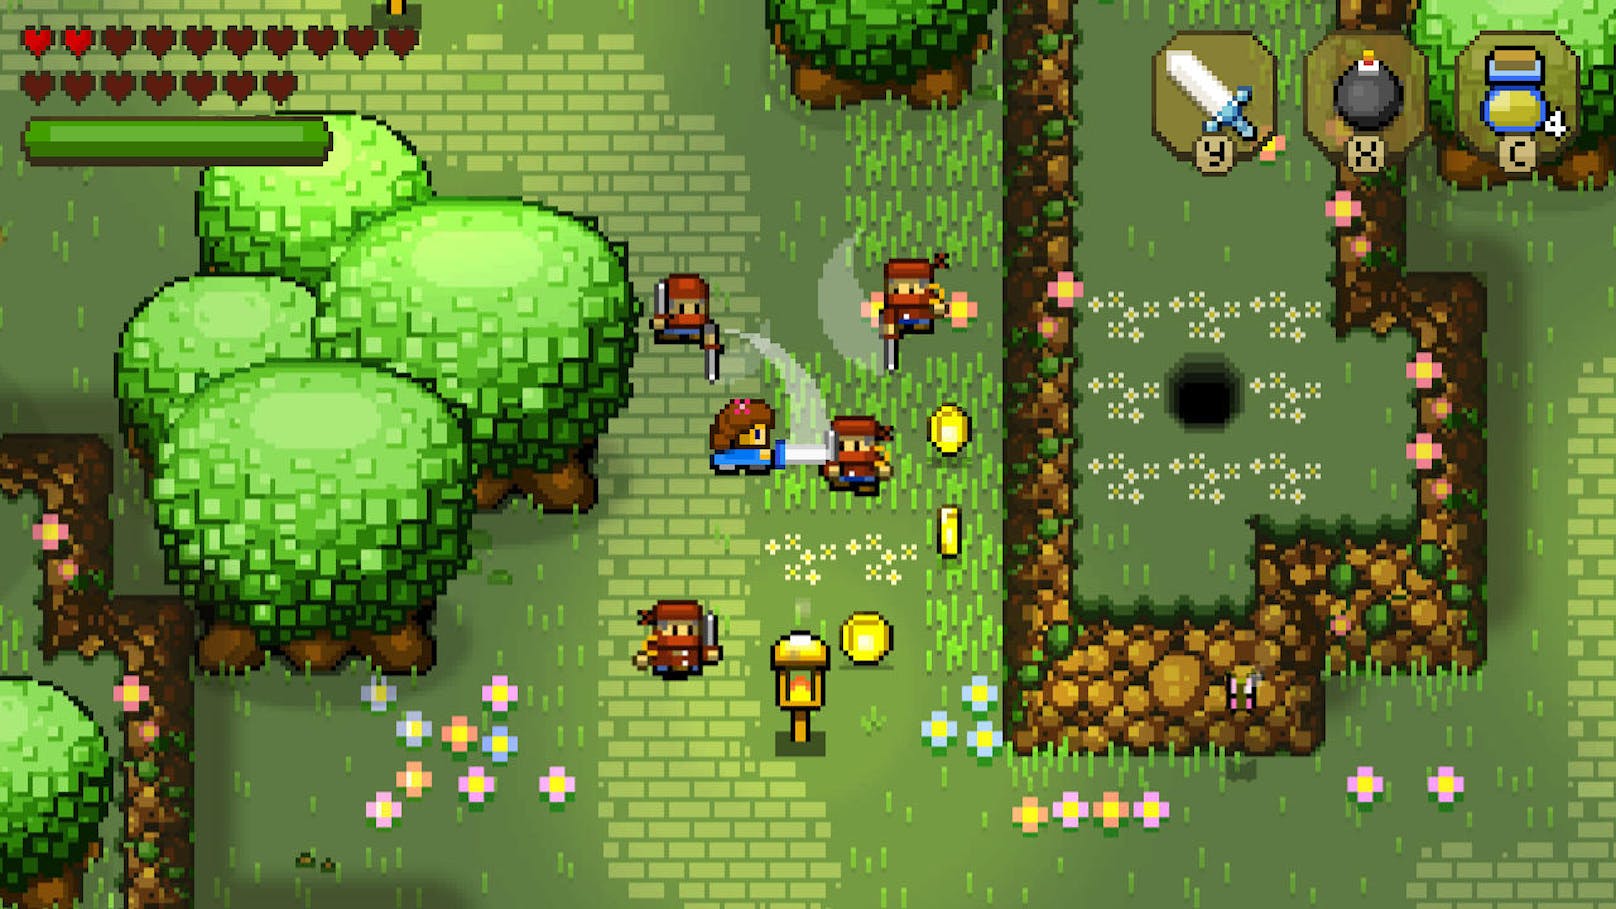  <a href="https://www.heute.at/digital/games/story/Blossom-Tales-im-Test--Tolle-Zelda-Hommage-45869498" target="_blank">Blossom Tales: The Sleeping King</a>